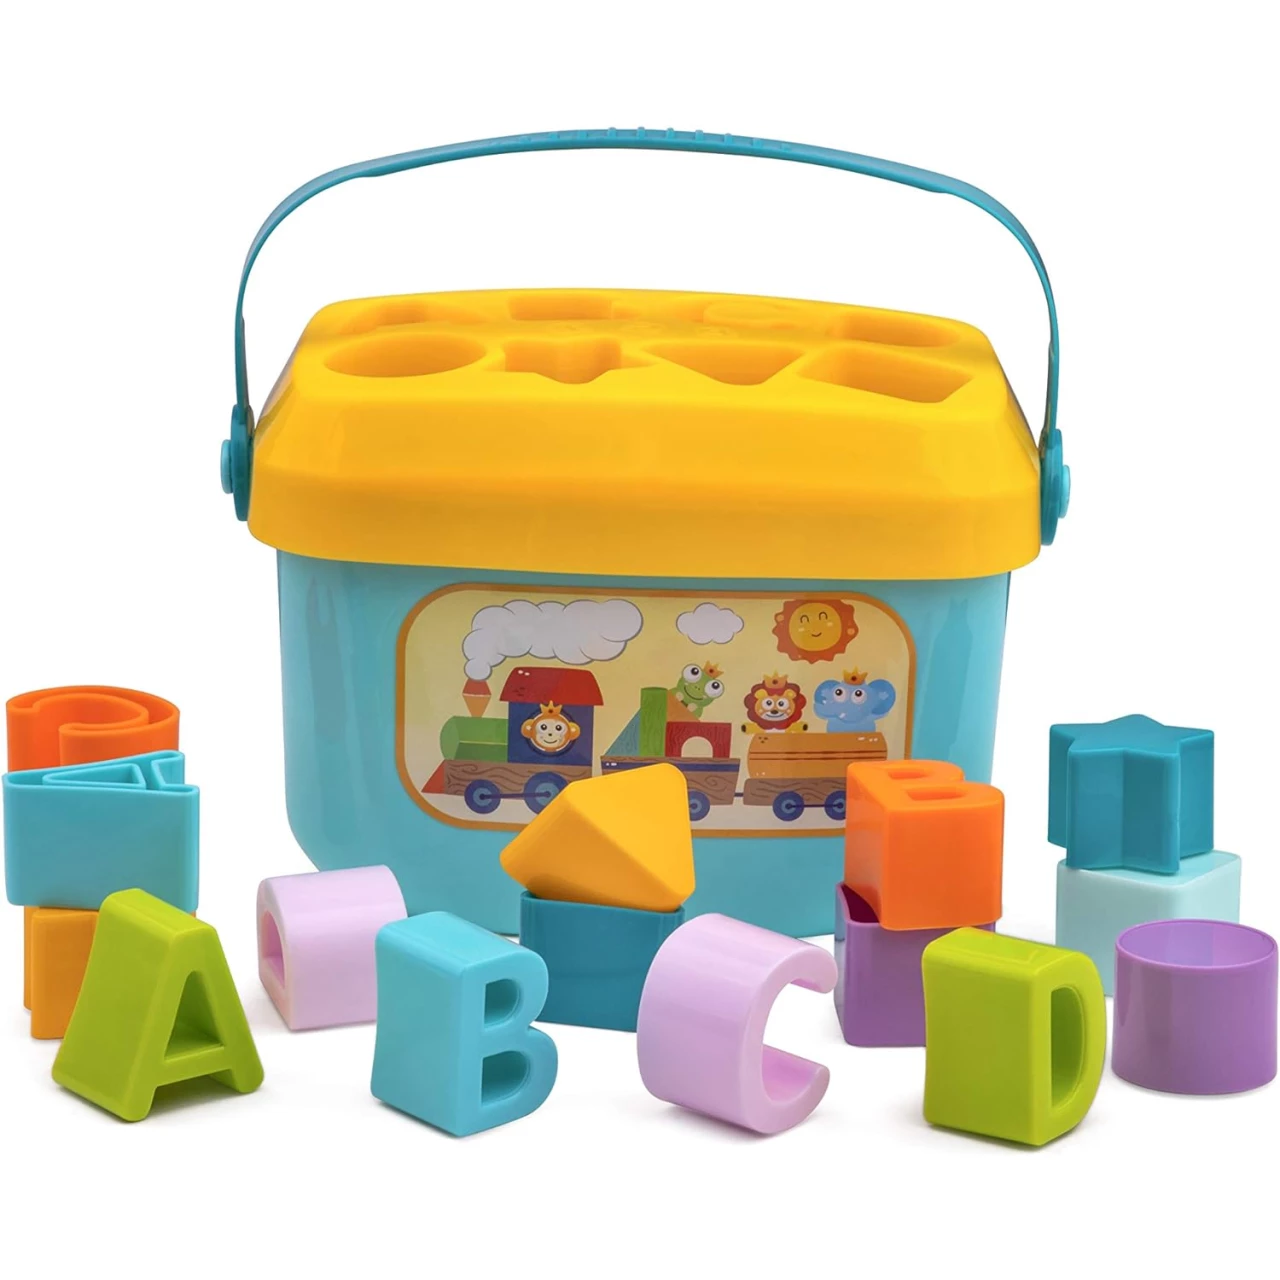 Playkidz Shape Sorter Baby and Toddler Toy